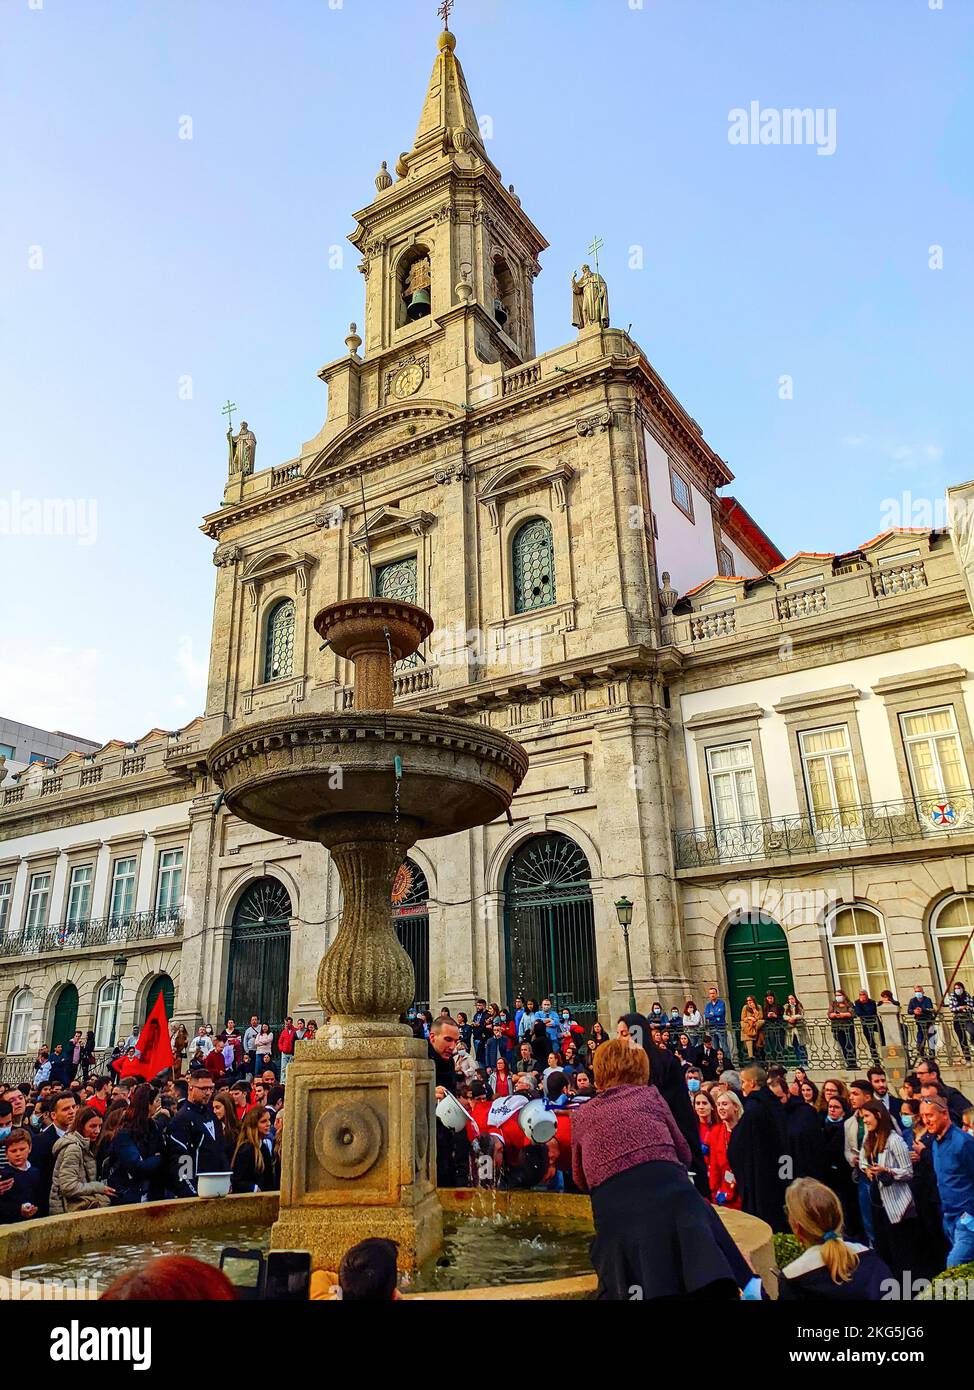 PORTO, PORTUGAL - MARCH 27, 2022: One of tradititional ceremonies of local students at Trindad square near fountain Stock Photo